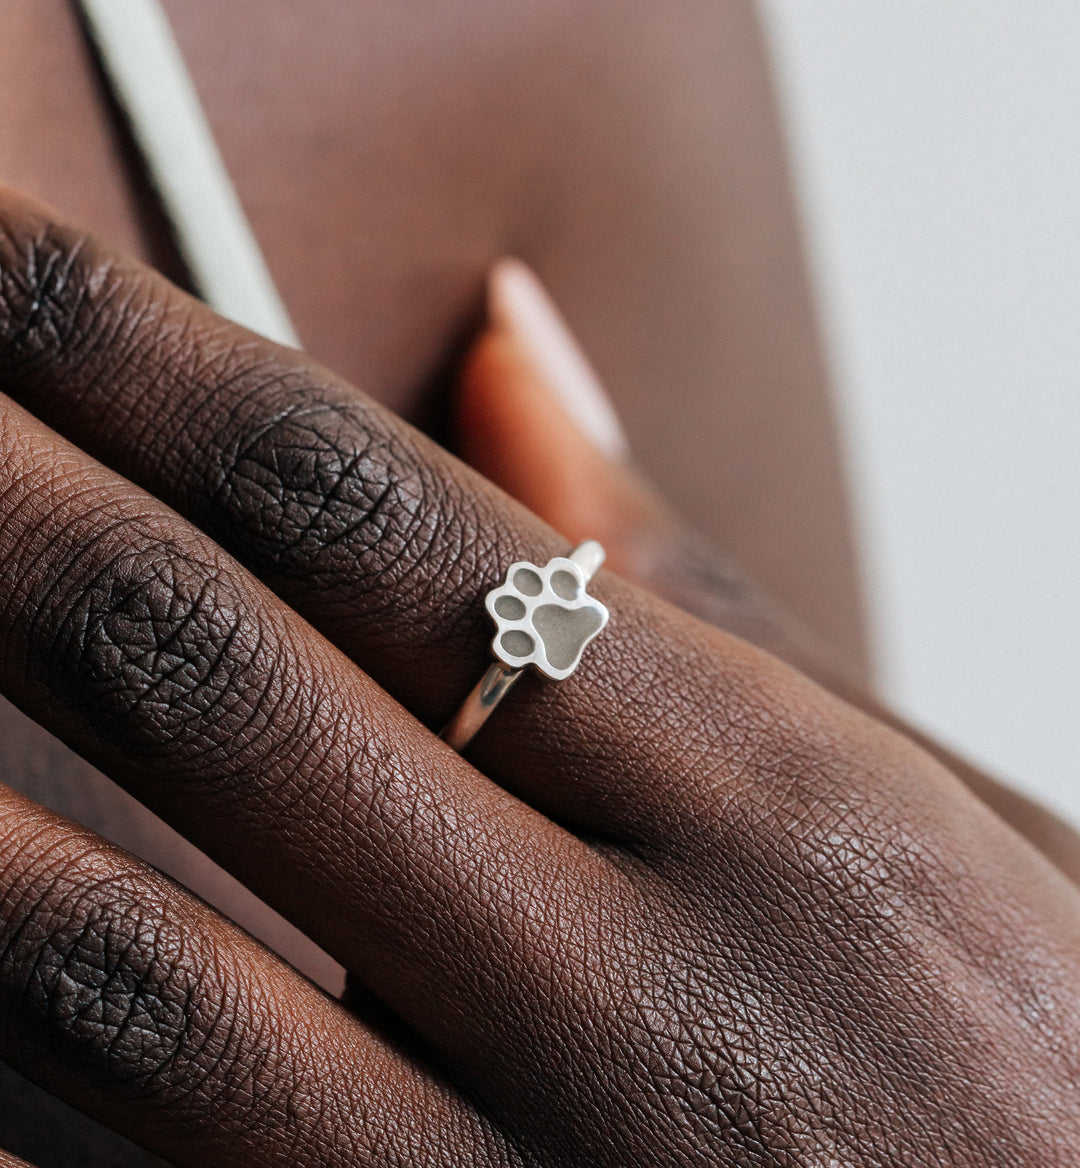 This photo shows a close up of a model wearing the Sterling Silver Paw Print Stacking Cremation Ring on her index finger